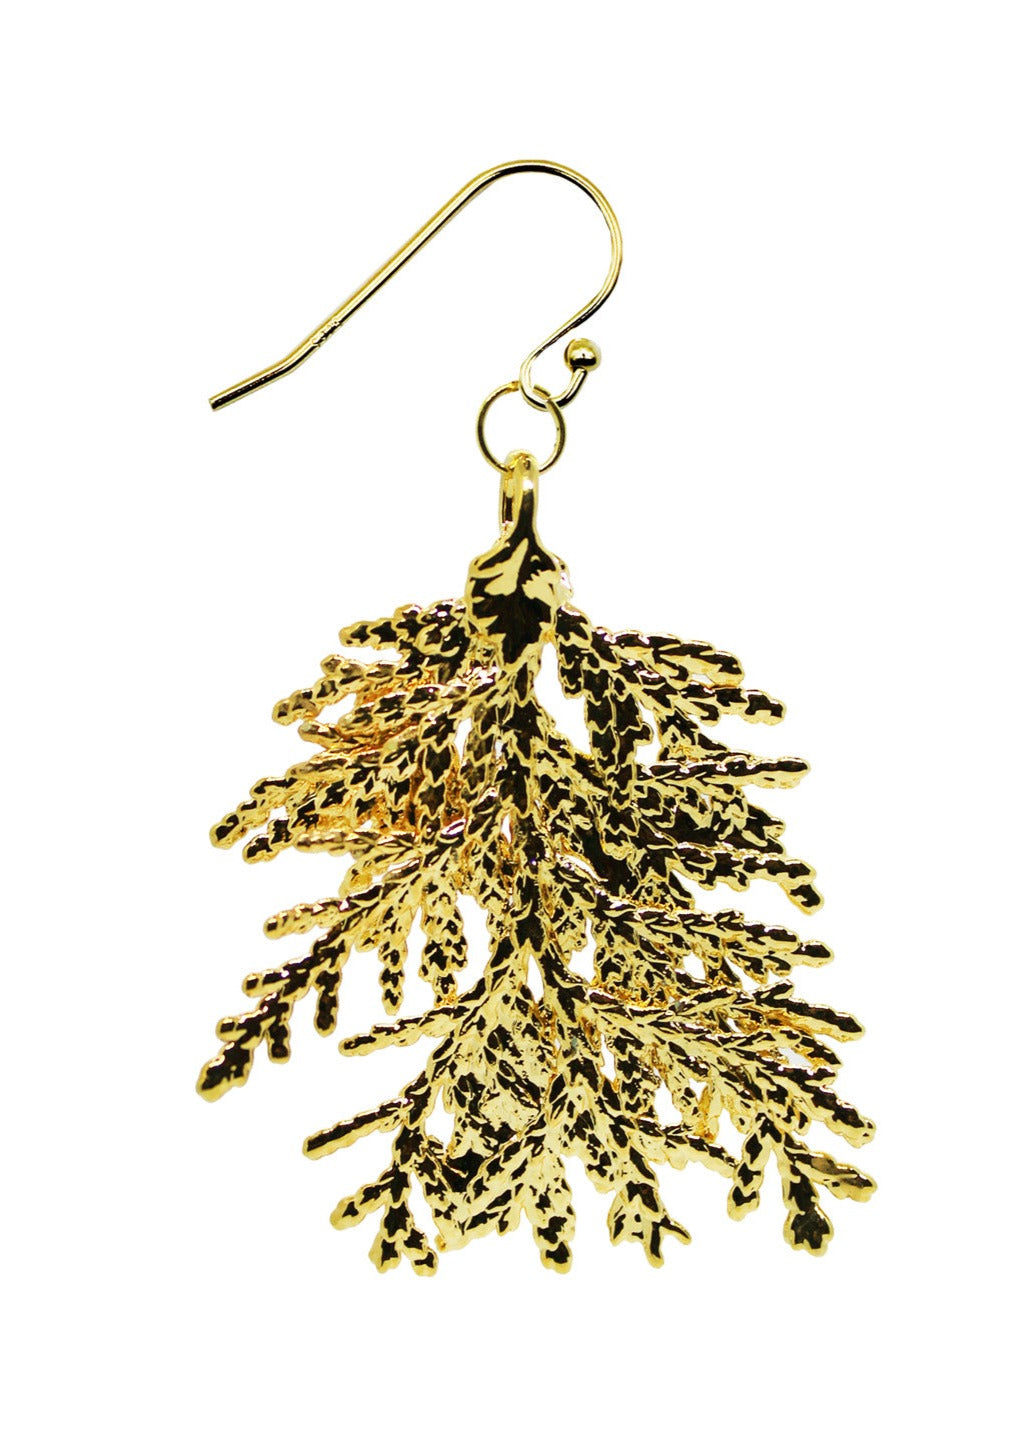 Cypress Leaf Electro-Plated with 24-Karat Gold on a French Hook Earring